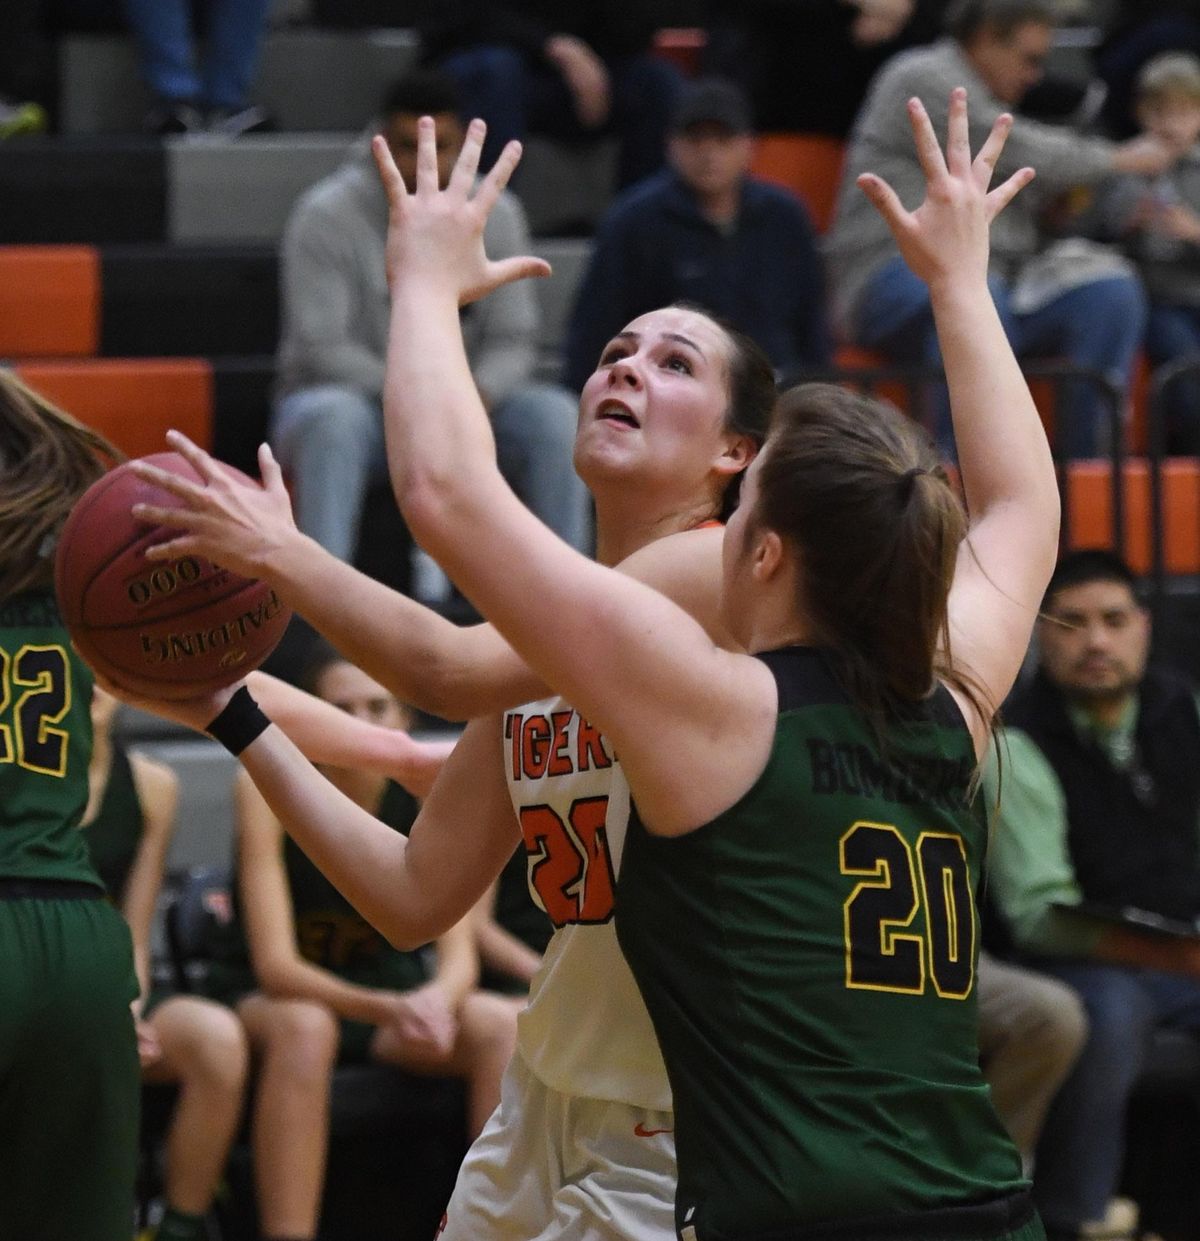 Lewis and Clark senior guard Dominique Arquette (20) eyes the basket as Richland’s Halee Pierce defends during a District 8 first round high school basketball game on Feb. 6, 2019, at Lewis and Clark High School. (Colin Mulvany / The Spokesman-Review)